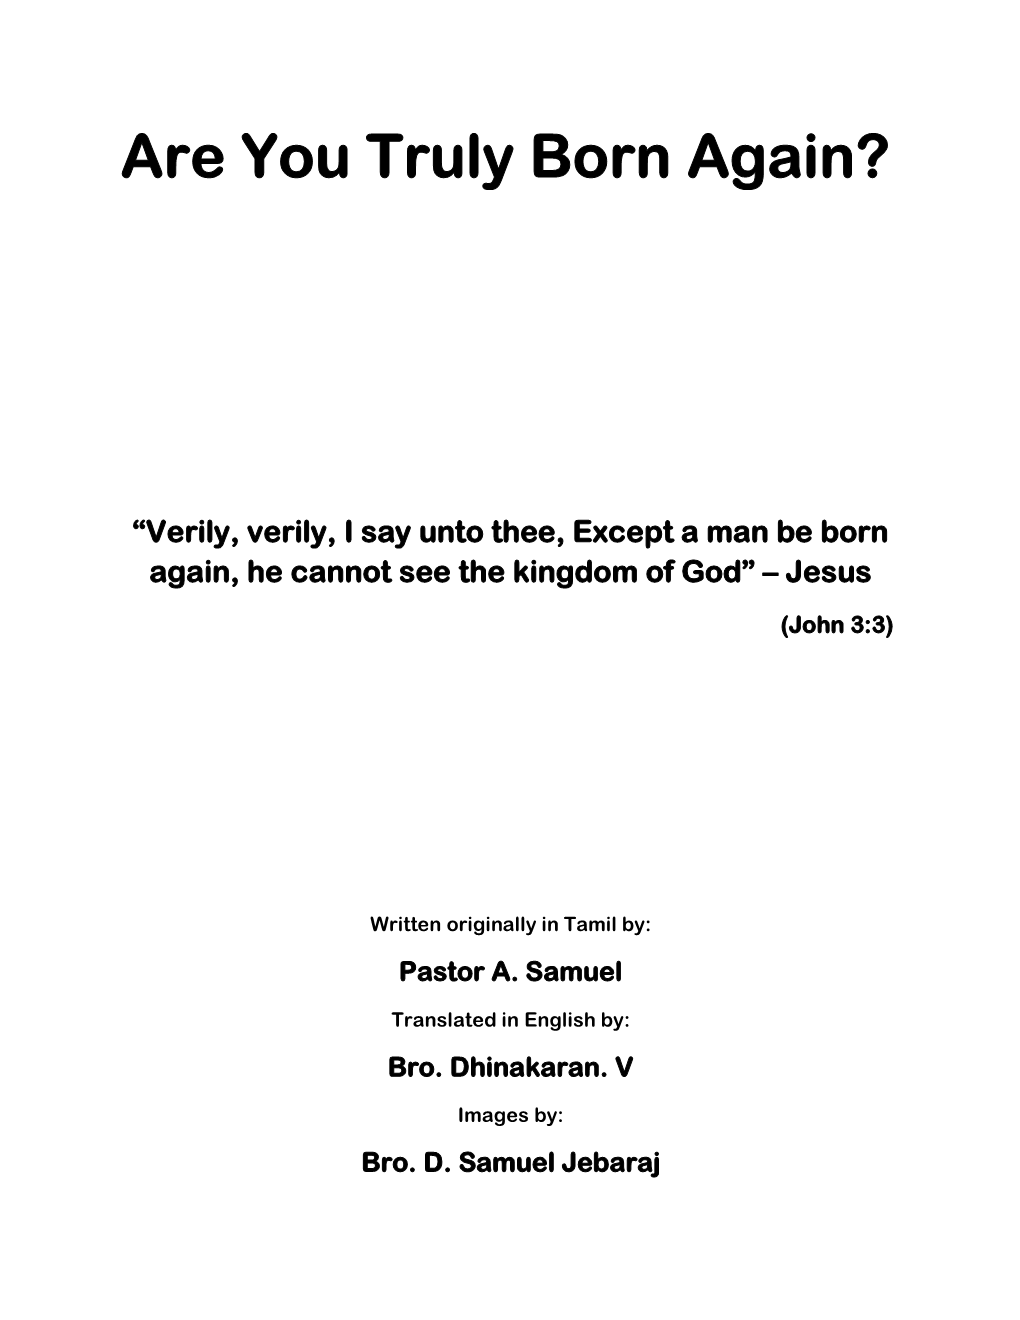 Are You Truly Born Again?